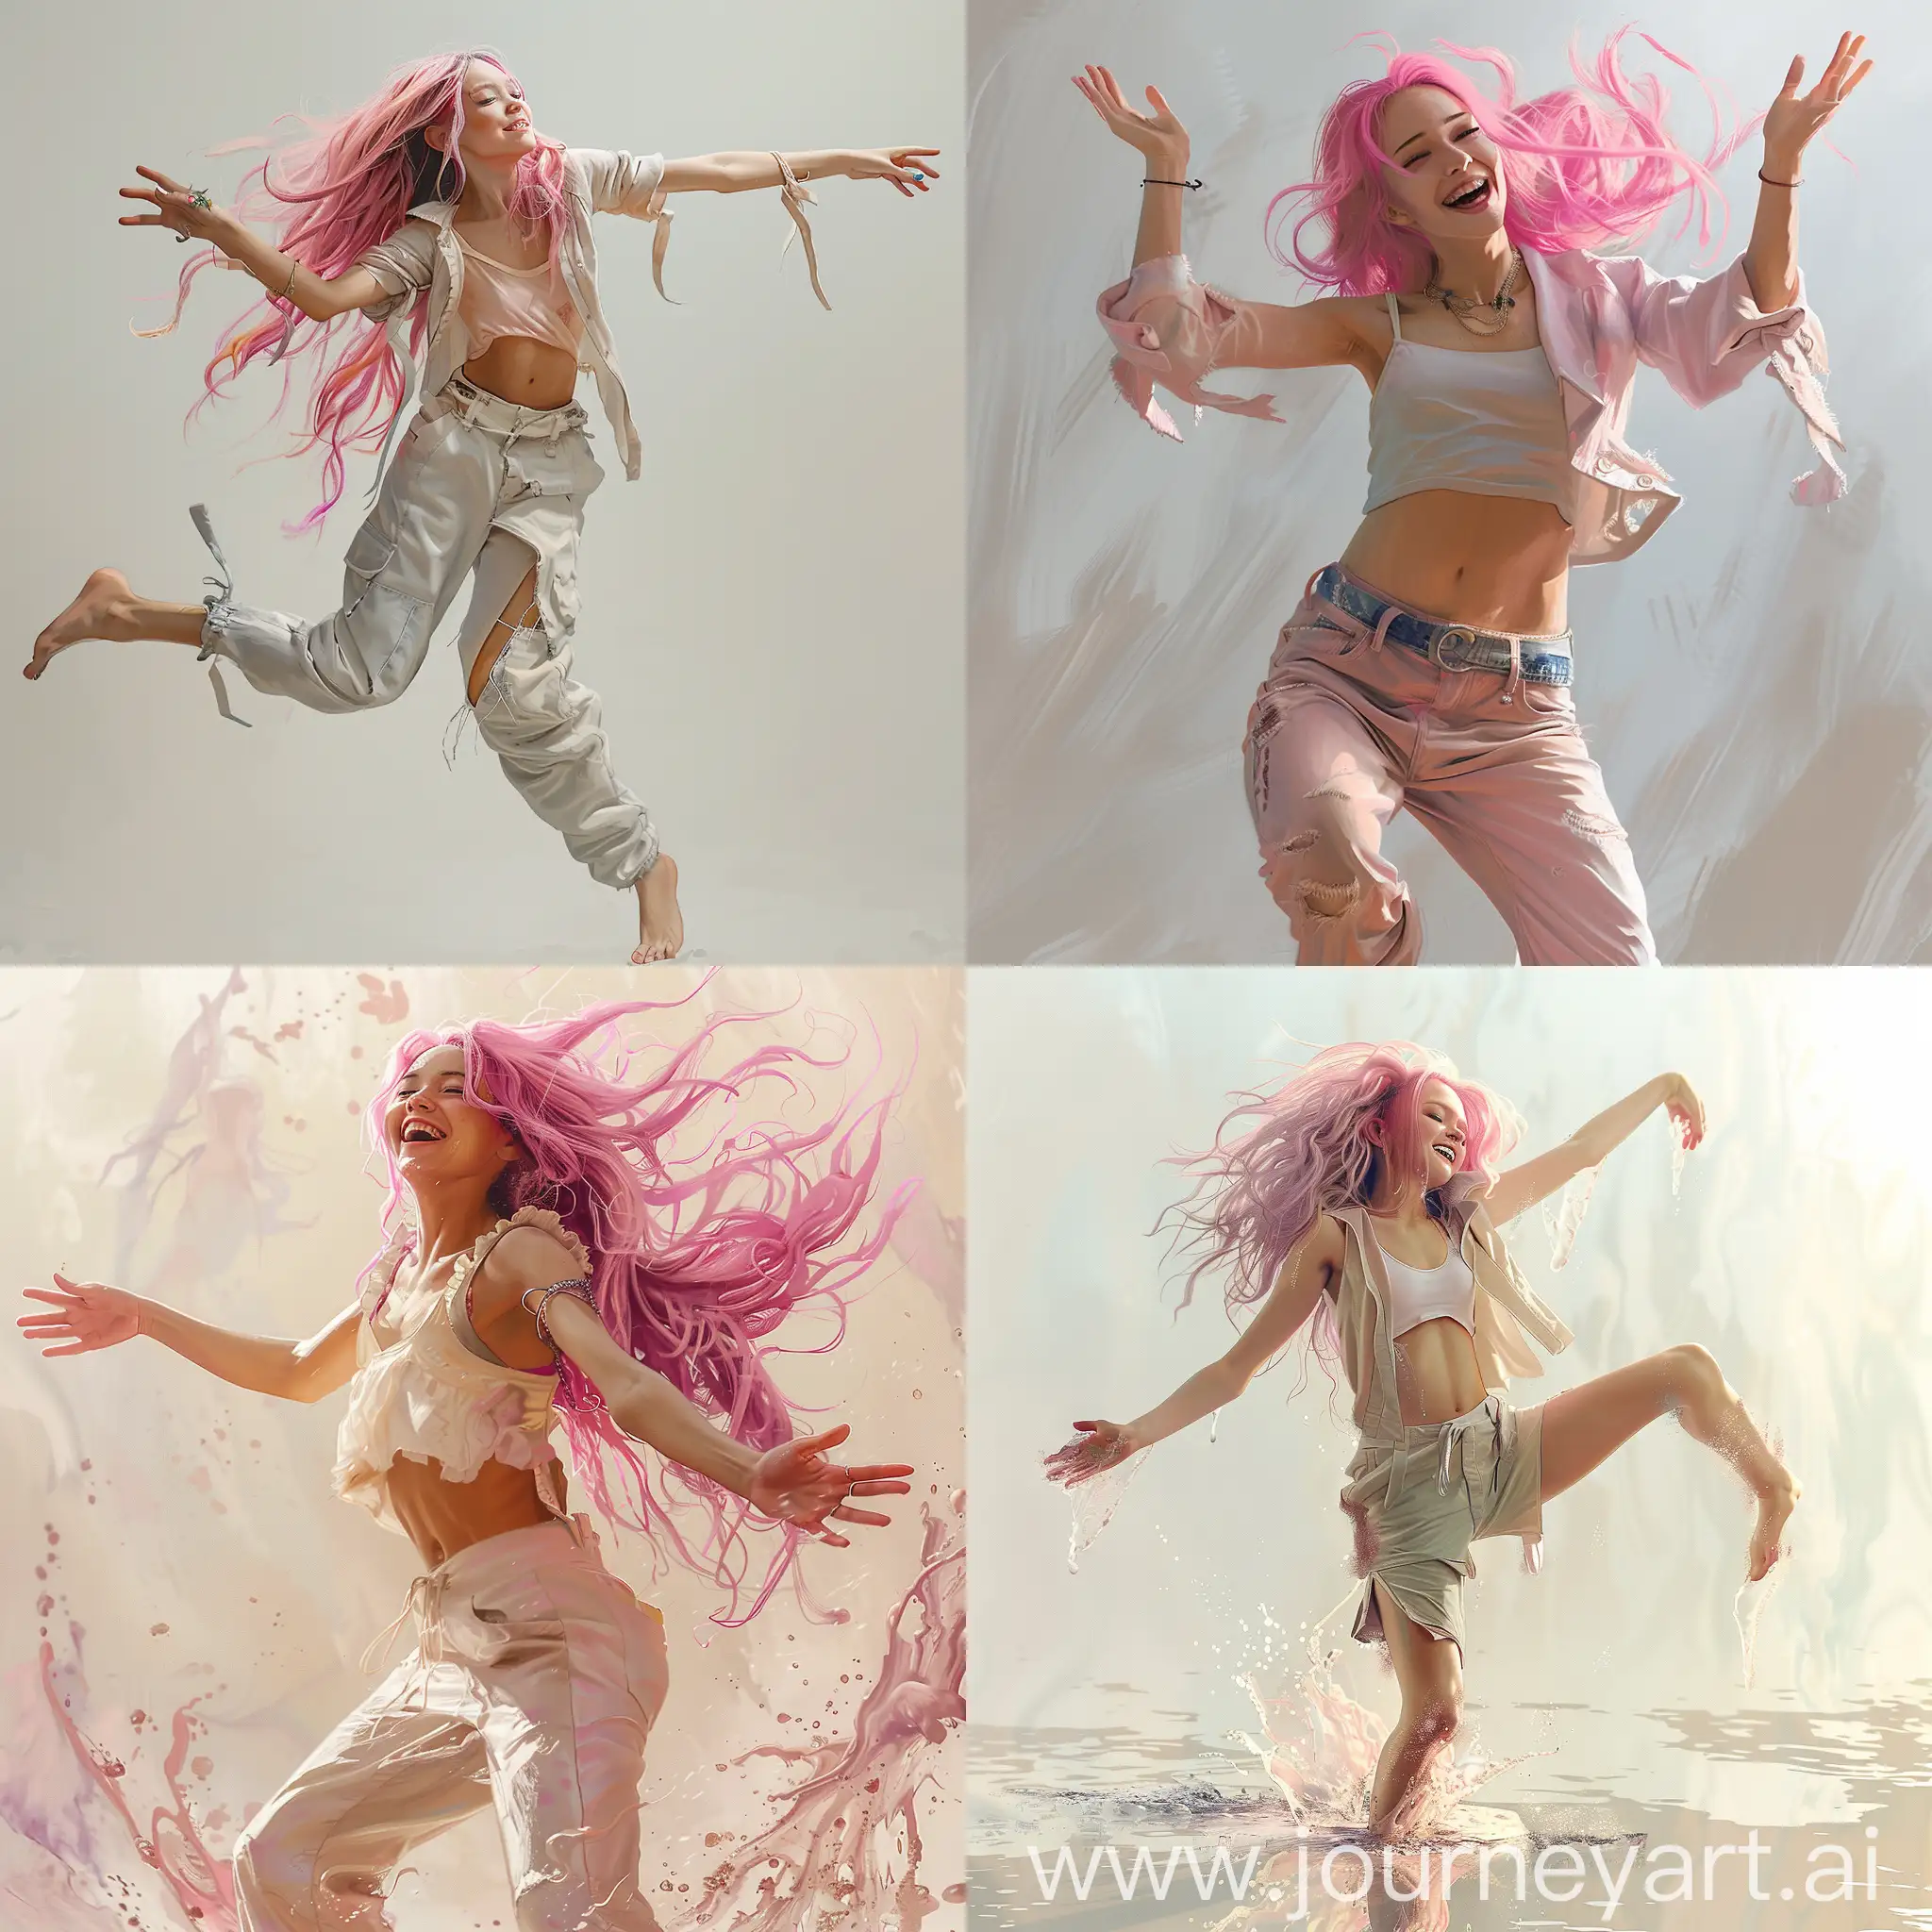 Pretty girl dancing in ecstatic reverie, pink hair, light clothing, photorealistic, very detailed, full of emotion and drama